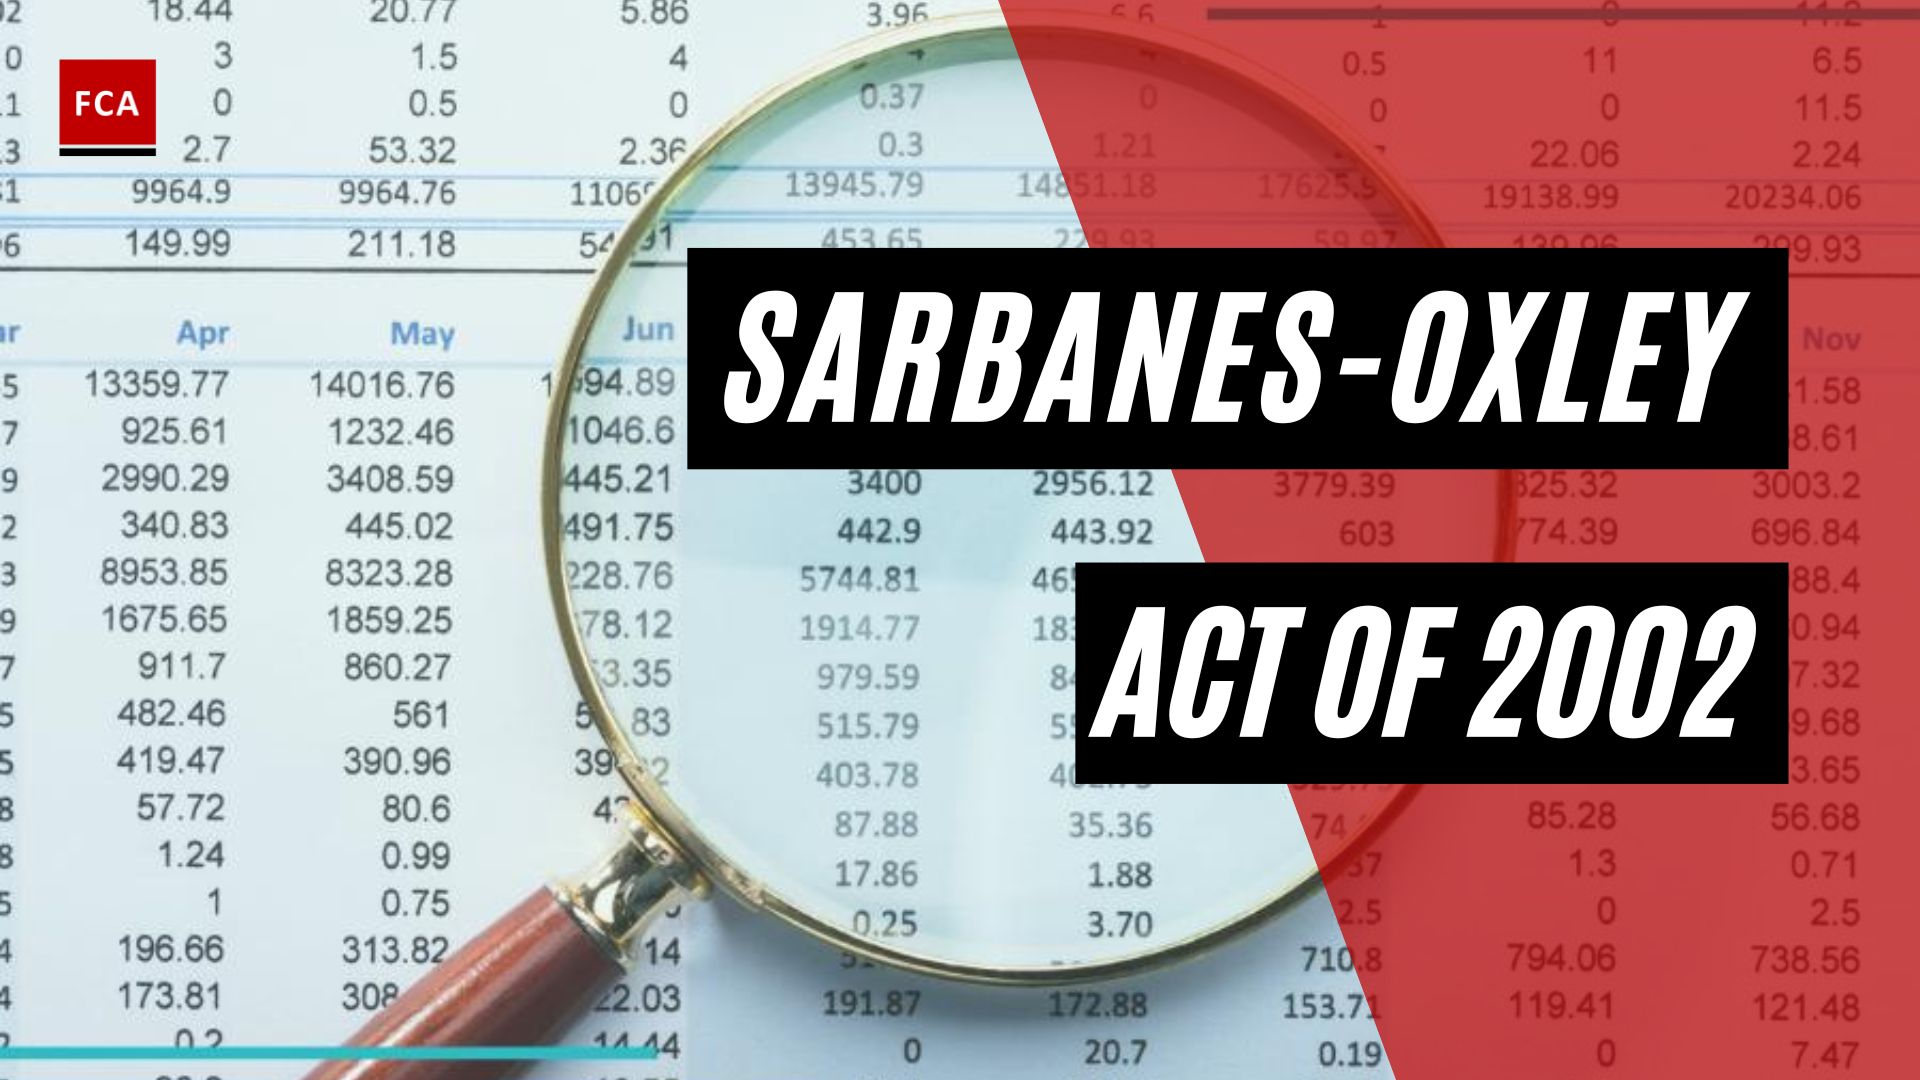 Sarbanes-Oxley Act Of 2002